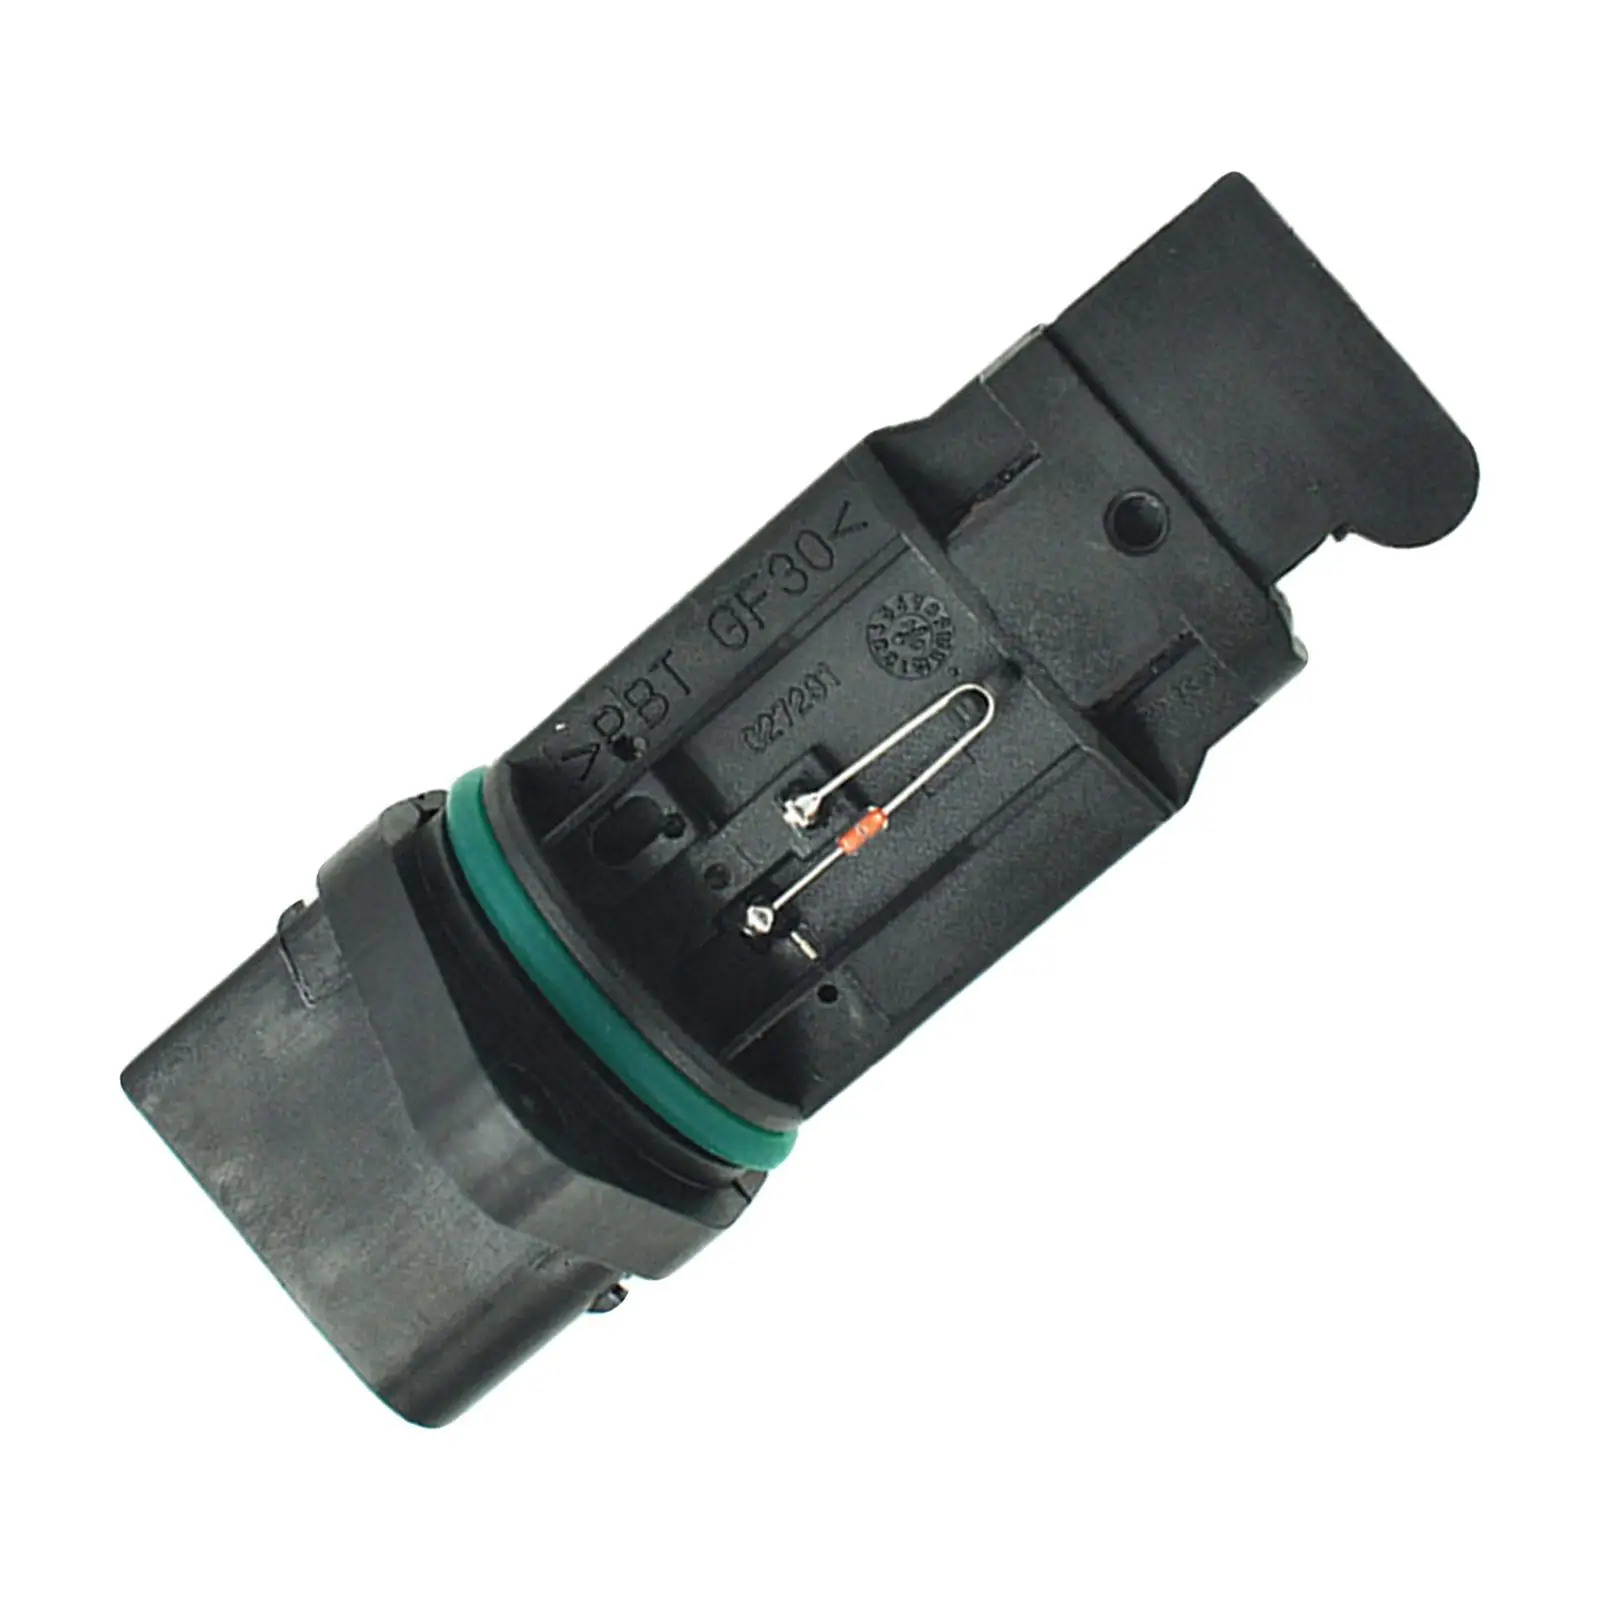  Maf Sensor Meter Replaces Assembly Fit for 911 3.99 ,0280217007 ,High Reliability,0 280 217